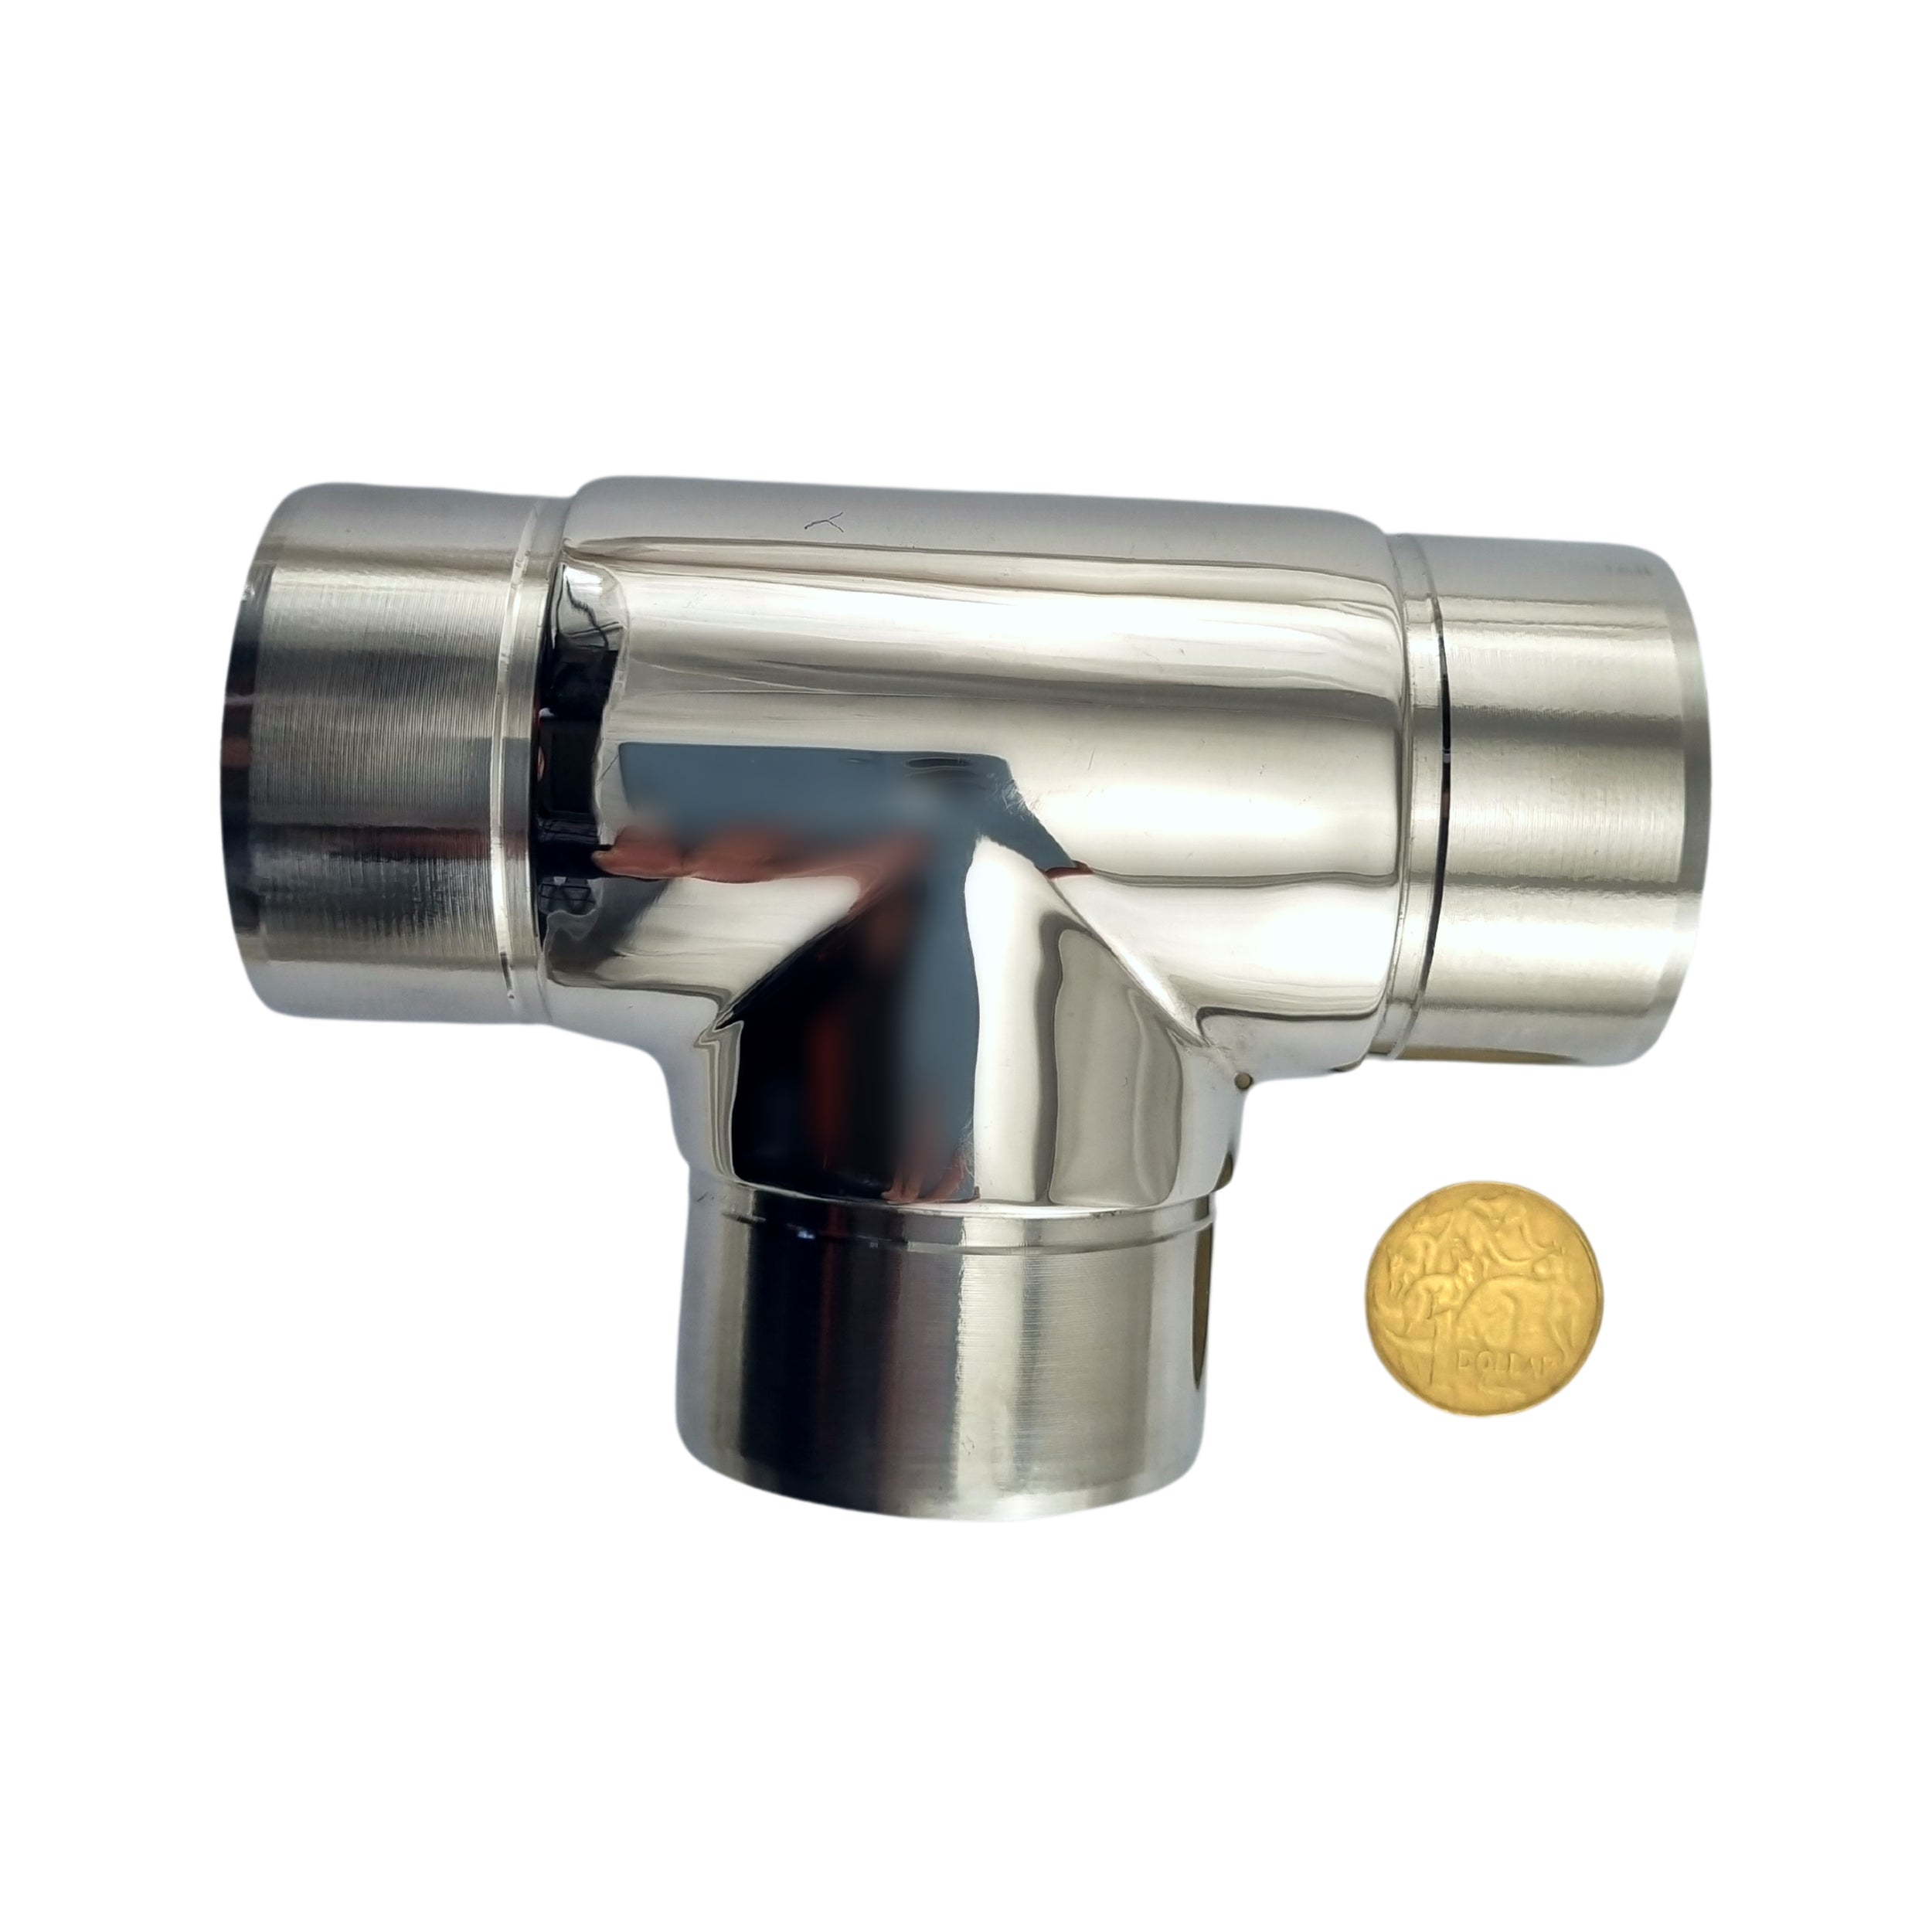 3-Way T/Tee Joiner Stainless Steel Rail Fitting for 50.8mm pipe. Australia wide shipping. Shop: chain.com.au